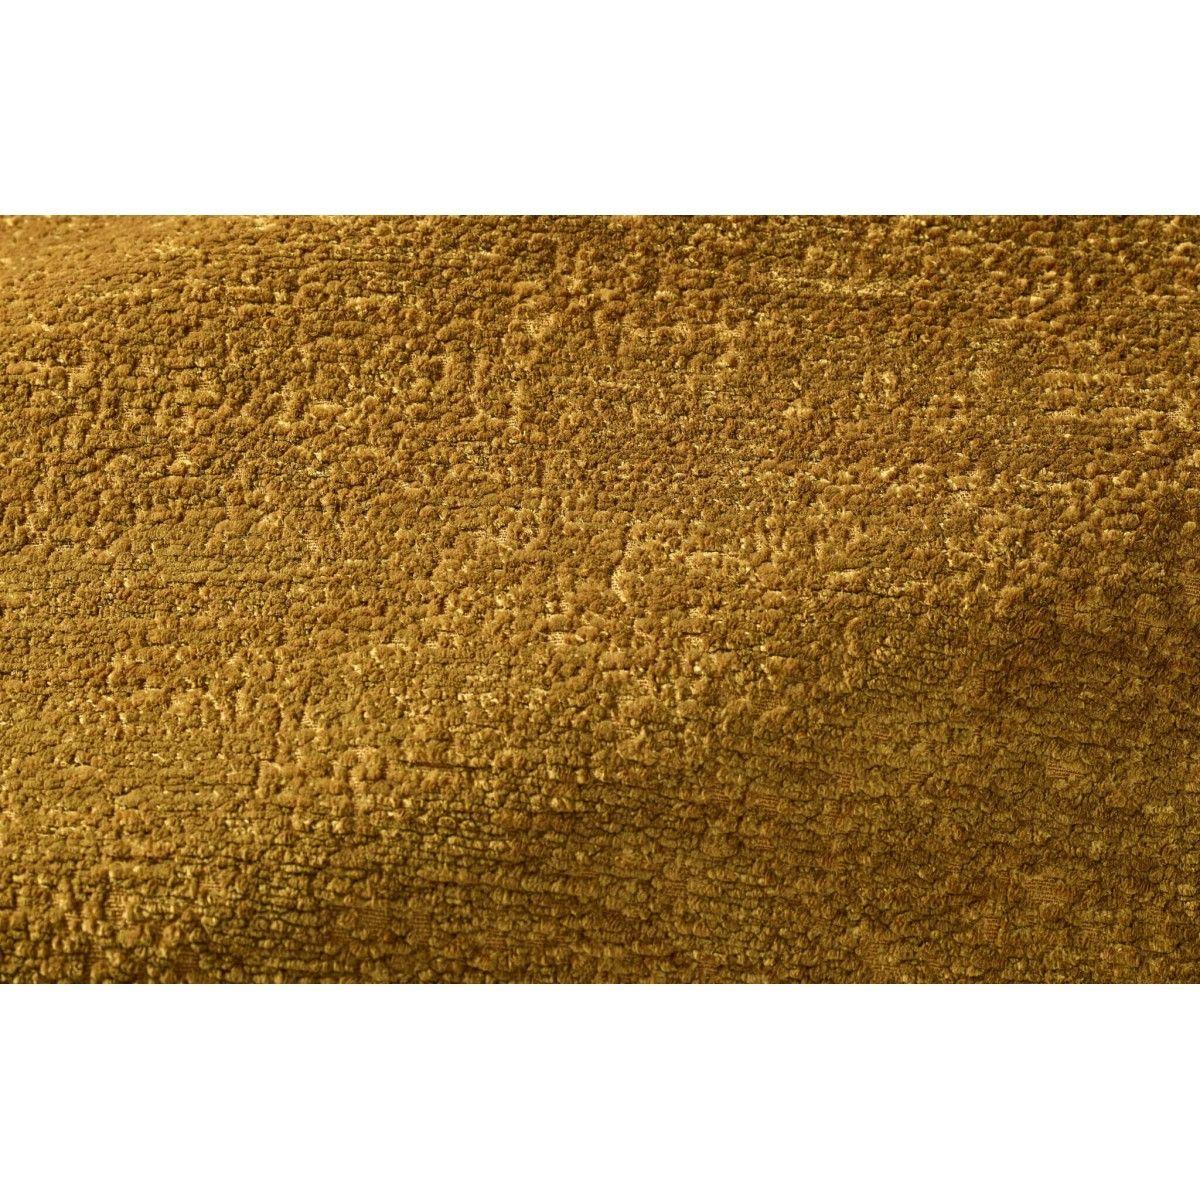 Popus Editions Giovanna 4 seater sofa in Amber Venice Chenille Velvet Fabric

Giovanna is a sofa with a strong profile. A sober, plush line, with this famous detail that changes everything, so as not to forget its strength of character and this